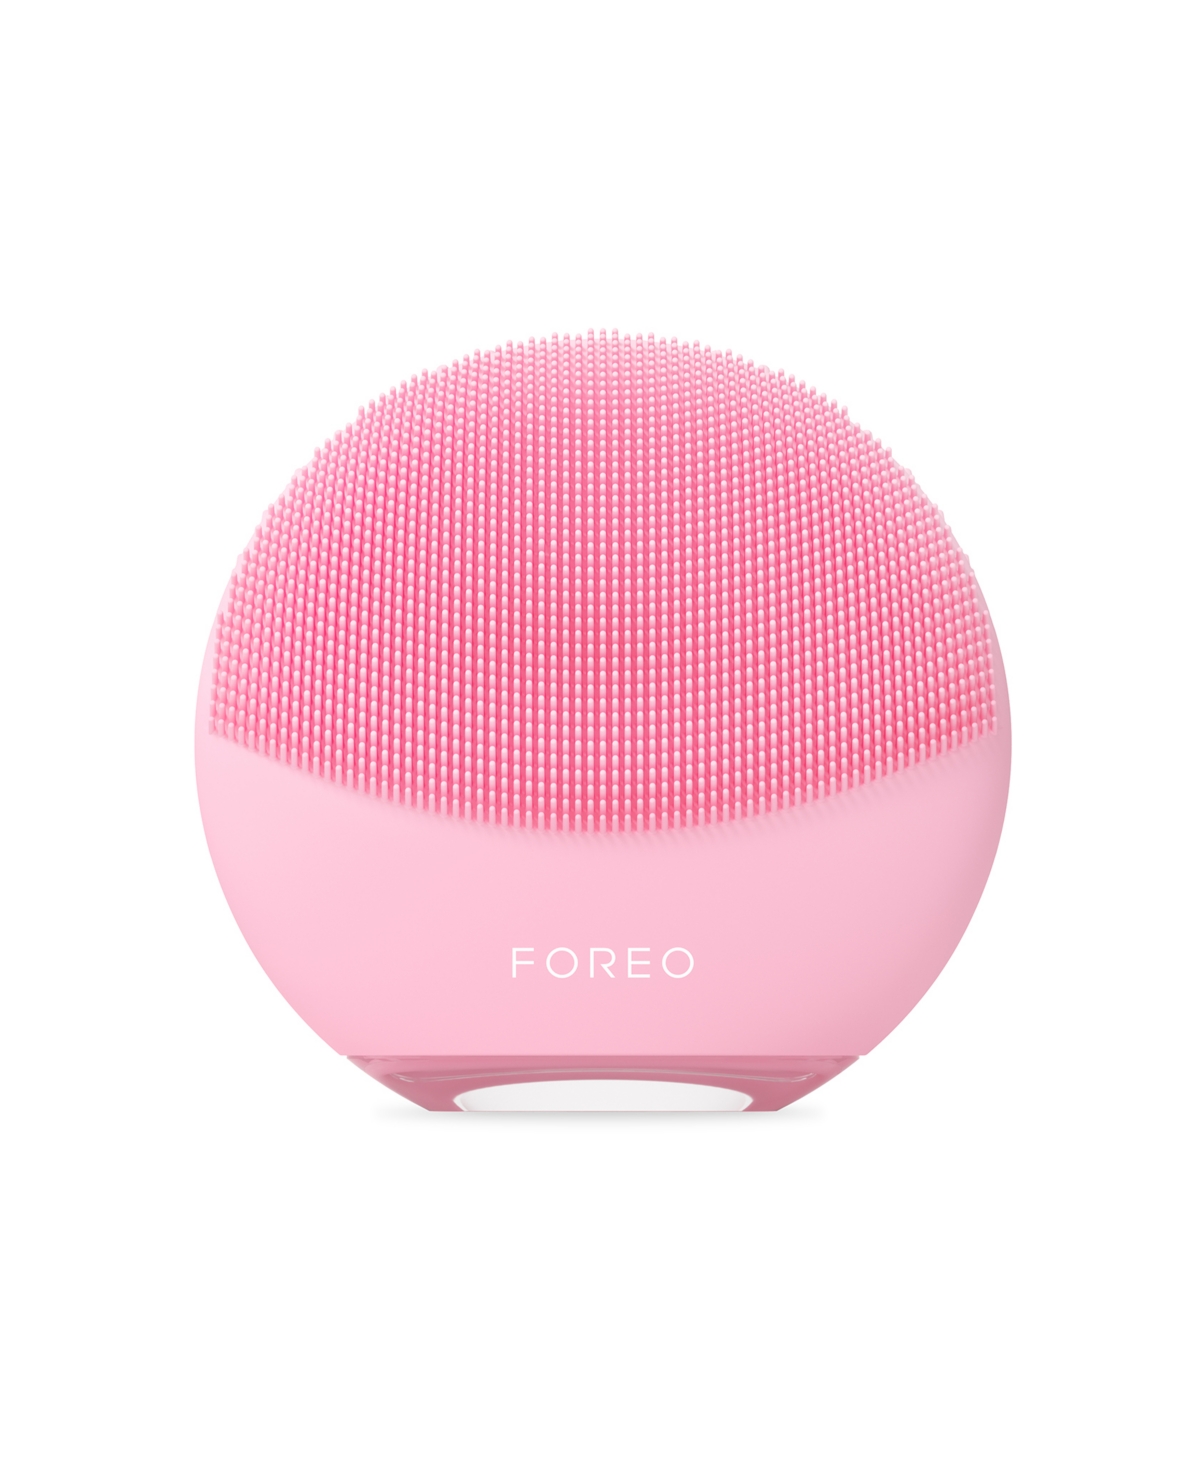 Foreo Luna 4 Mini Deep Cleansing Dual-sided Facial Cleansing Massager In Pearl Pink